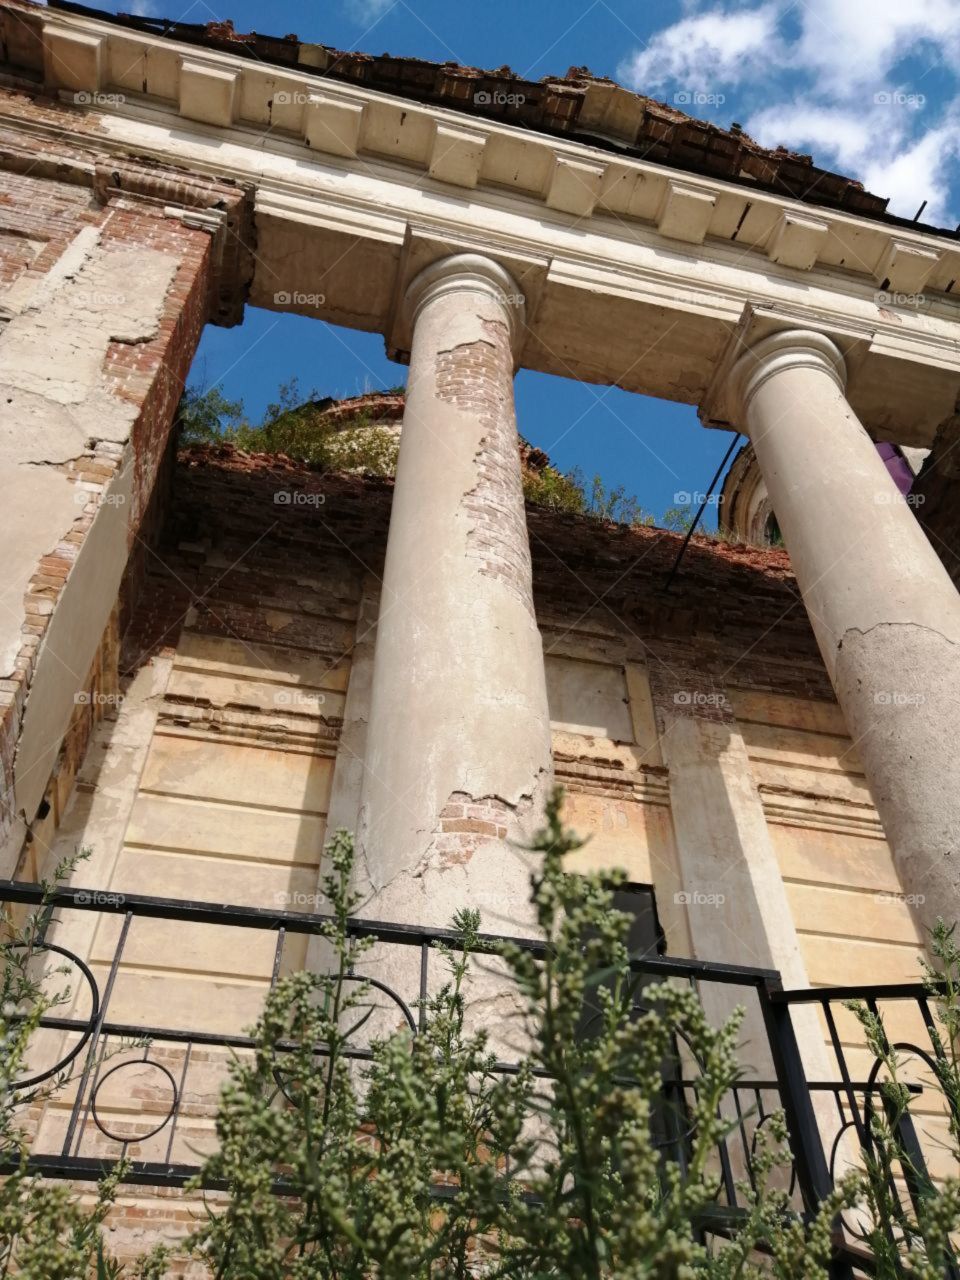 Columns of the destroyed church temple